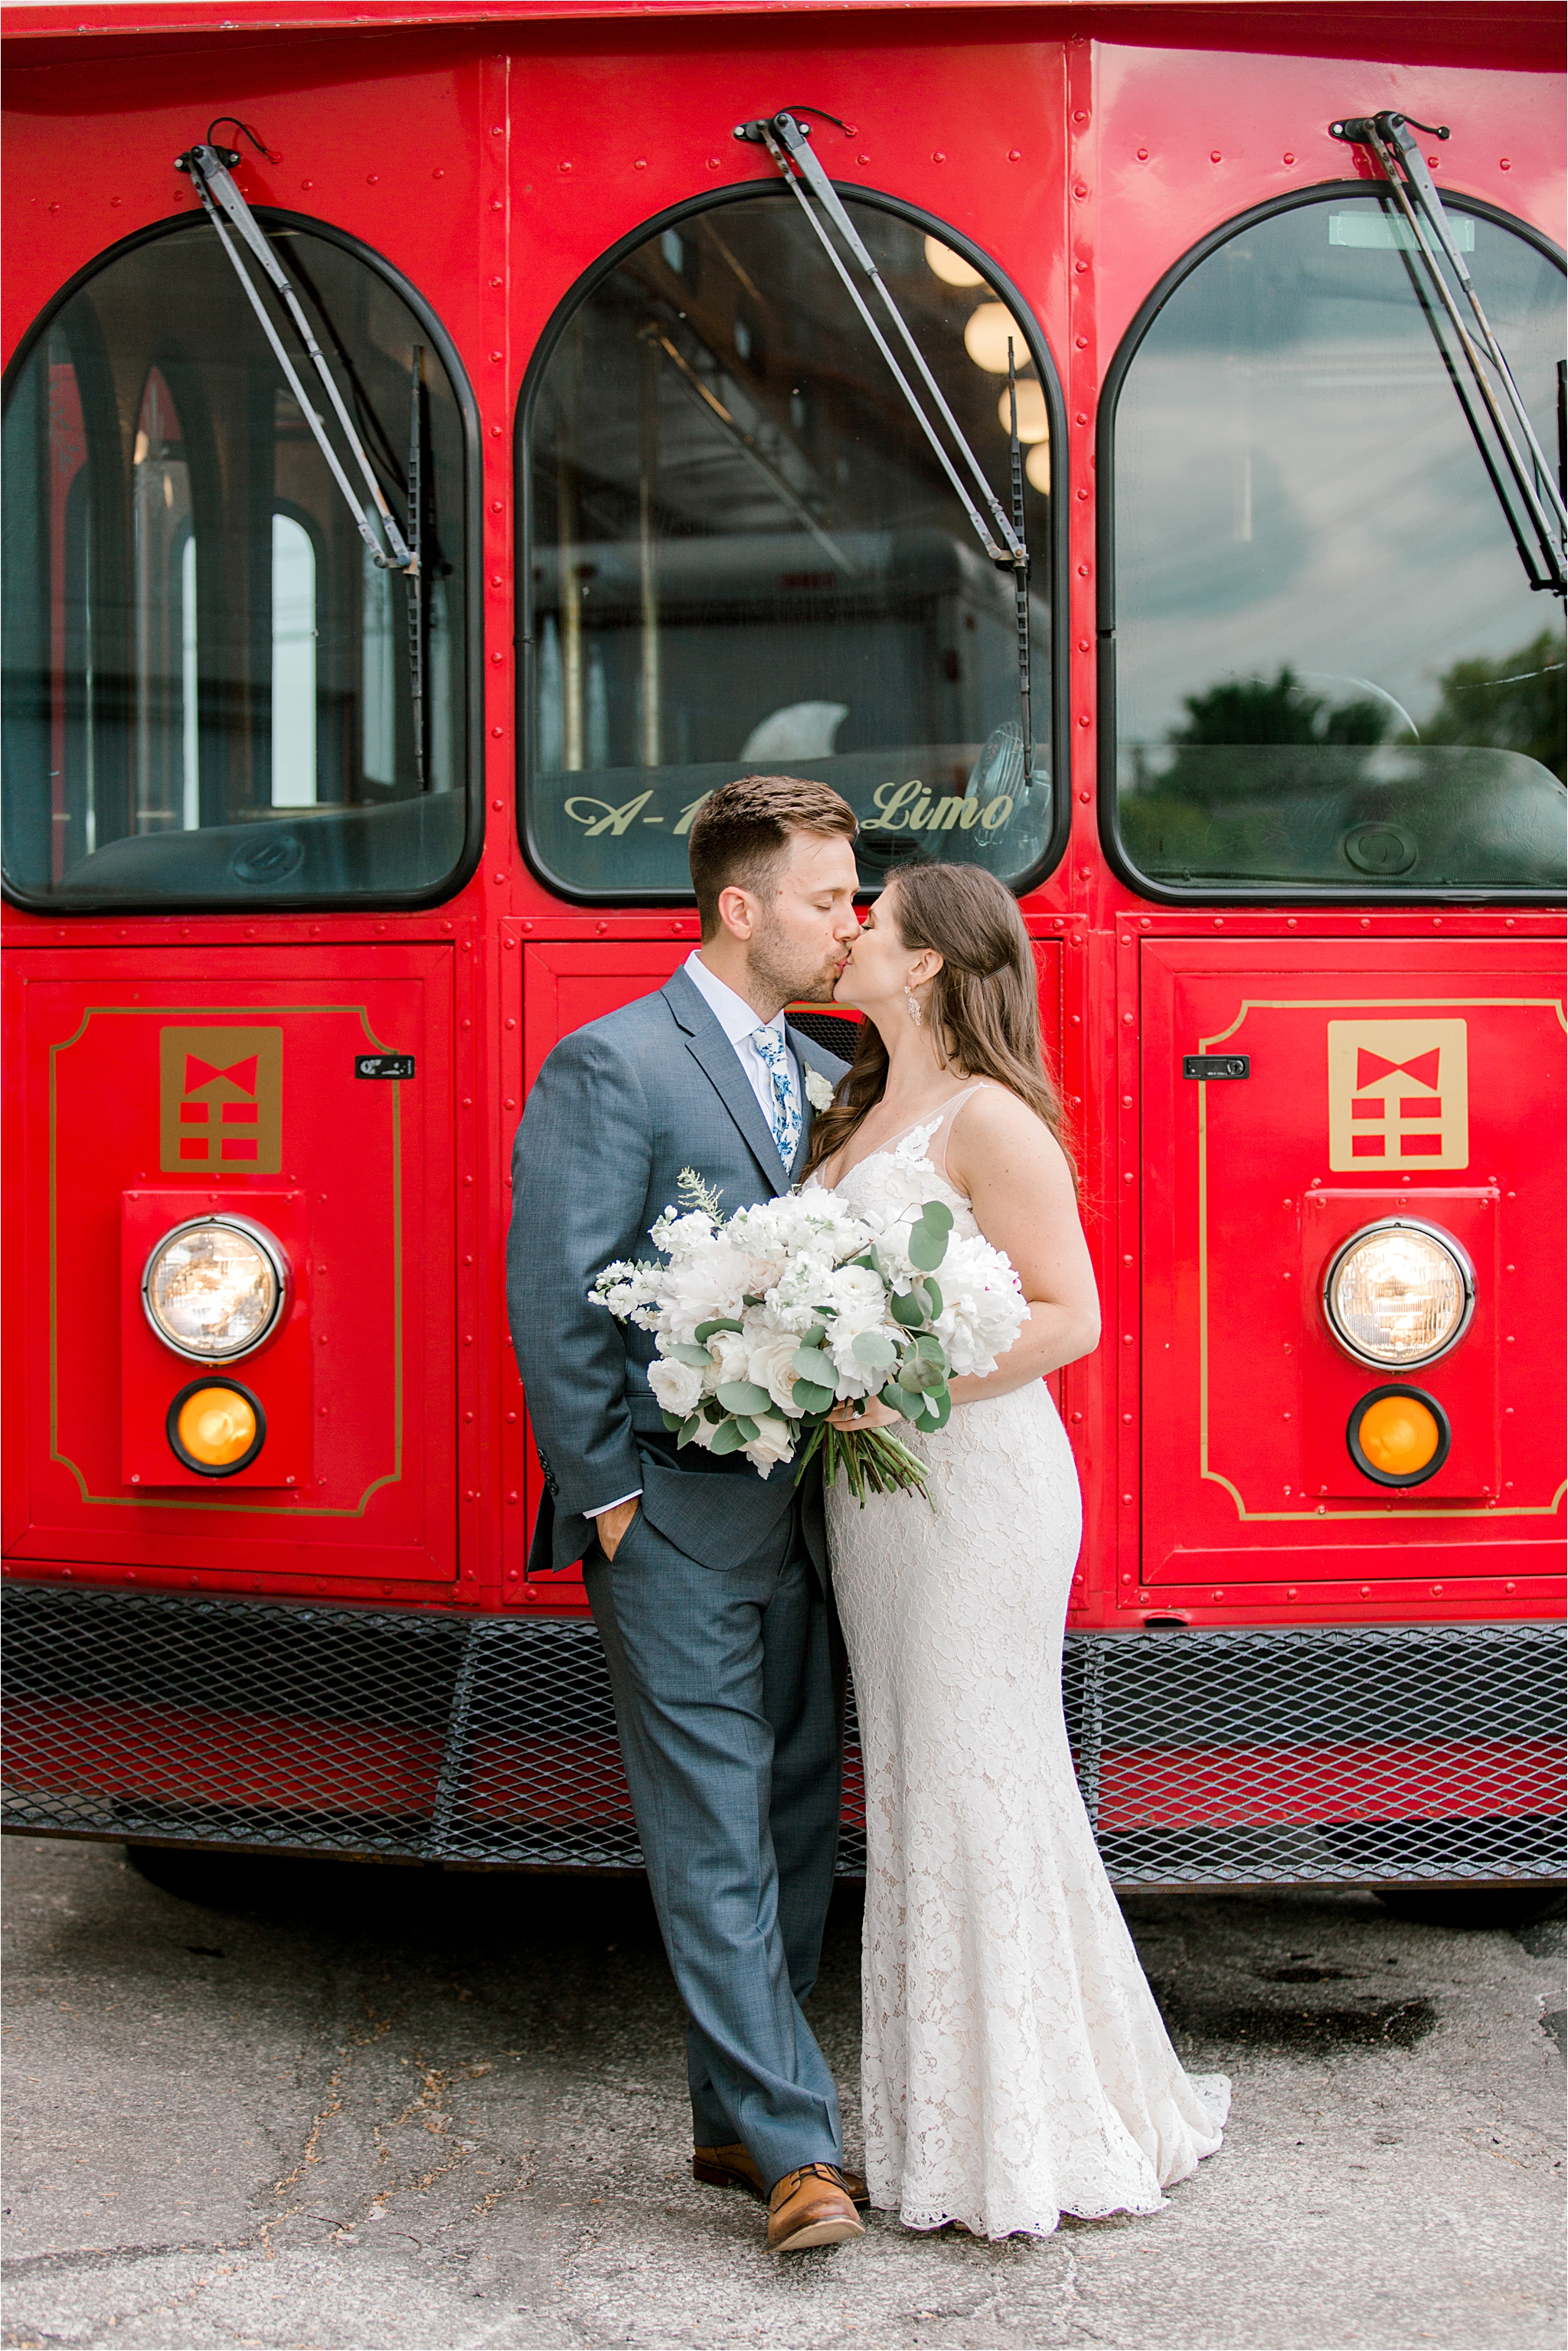 red trolley in cleveland ohio wedding limo services